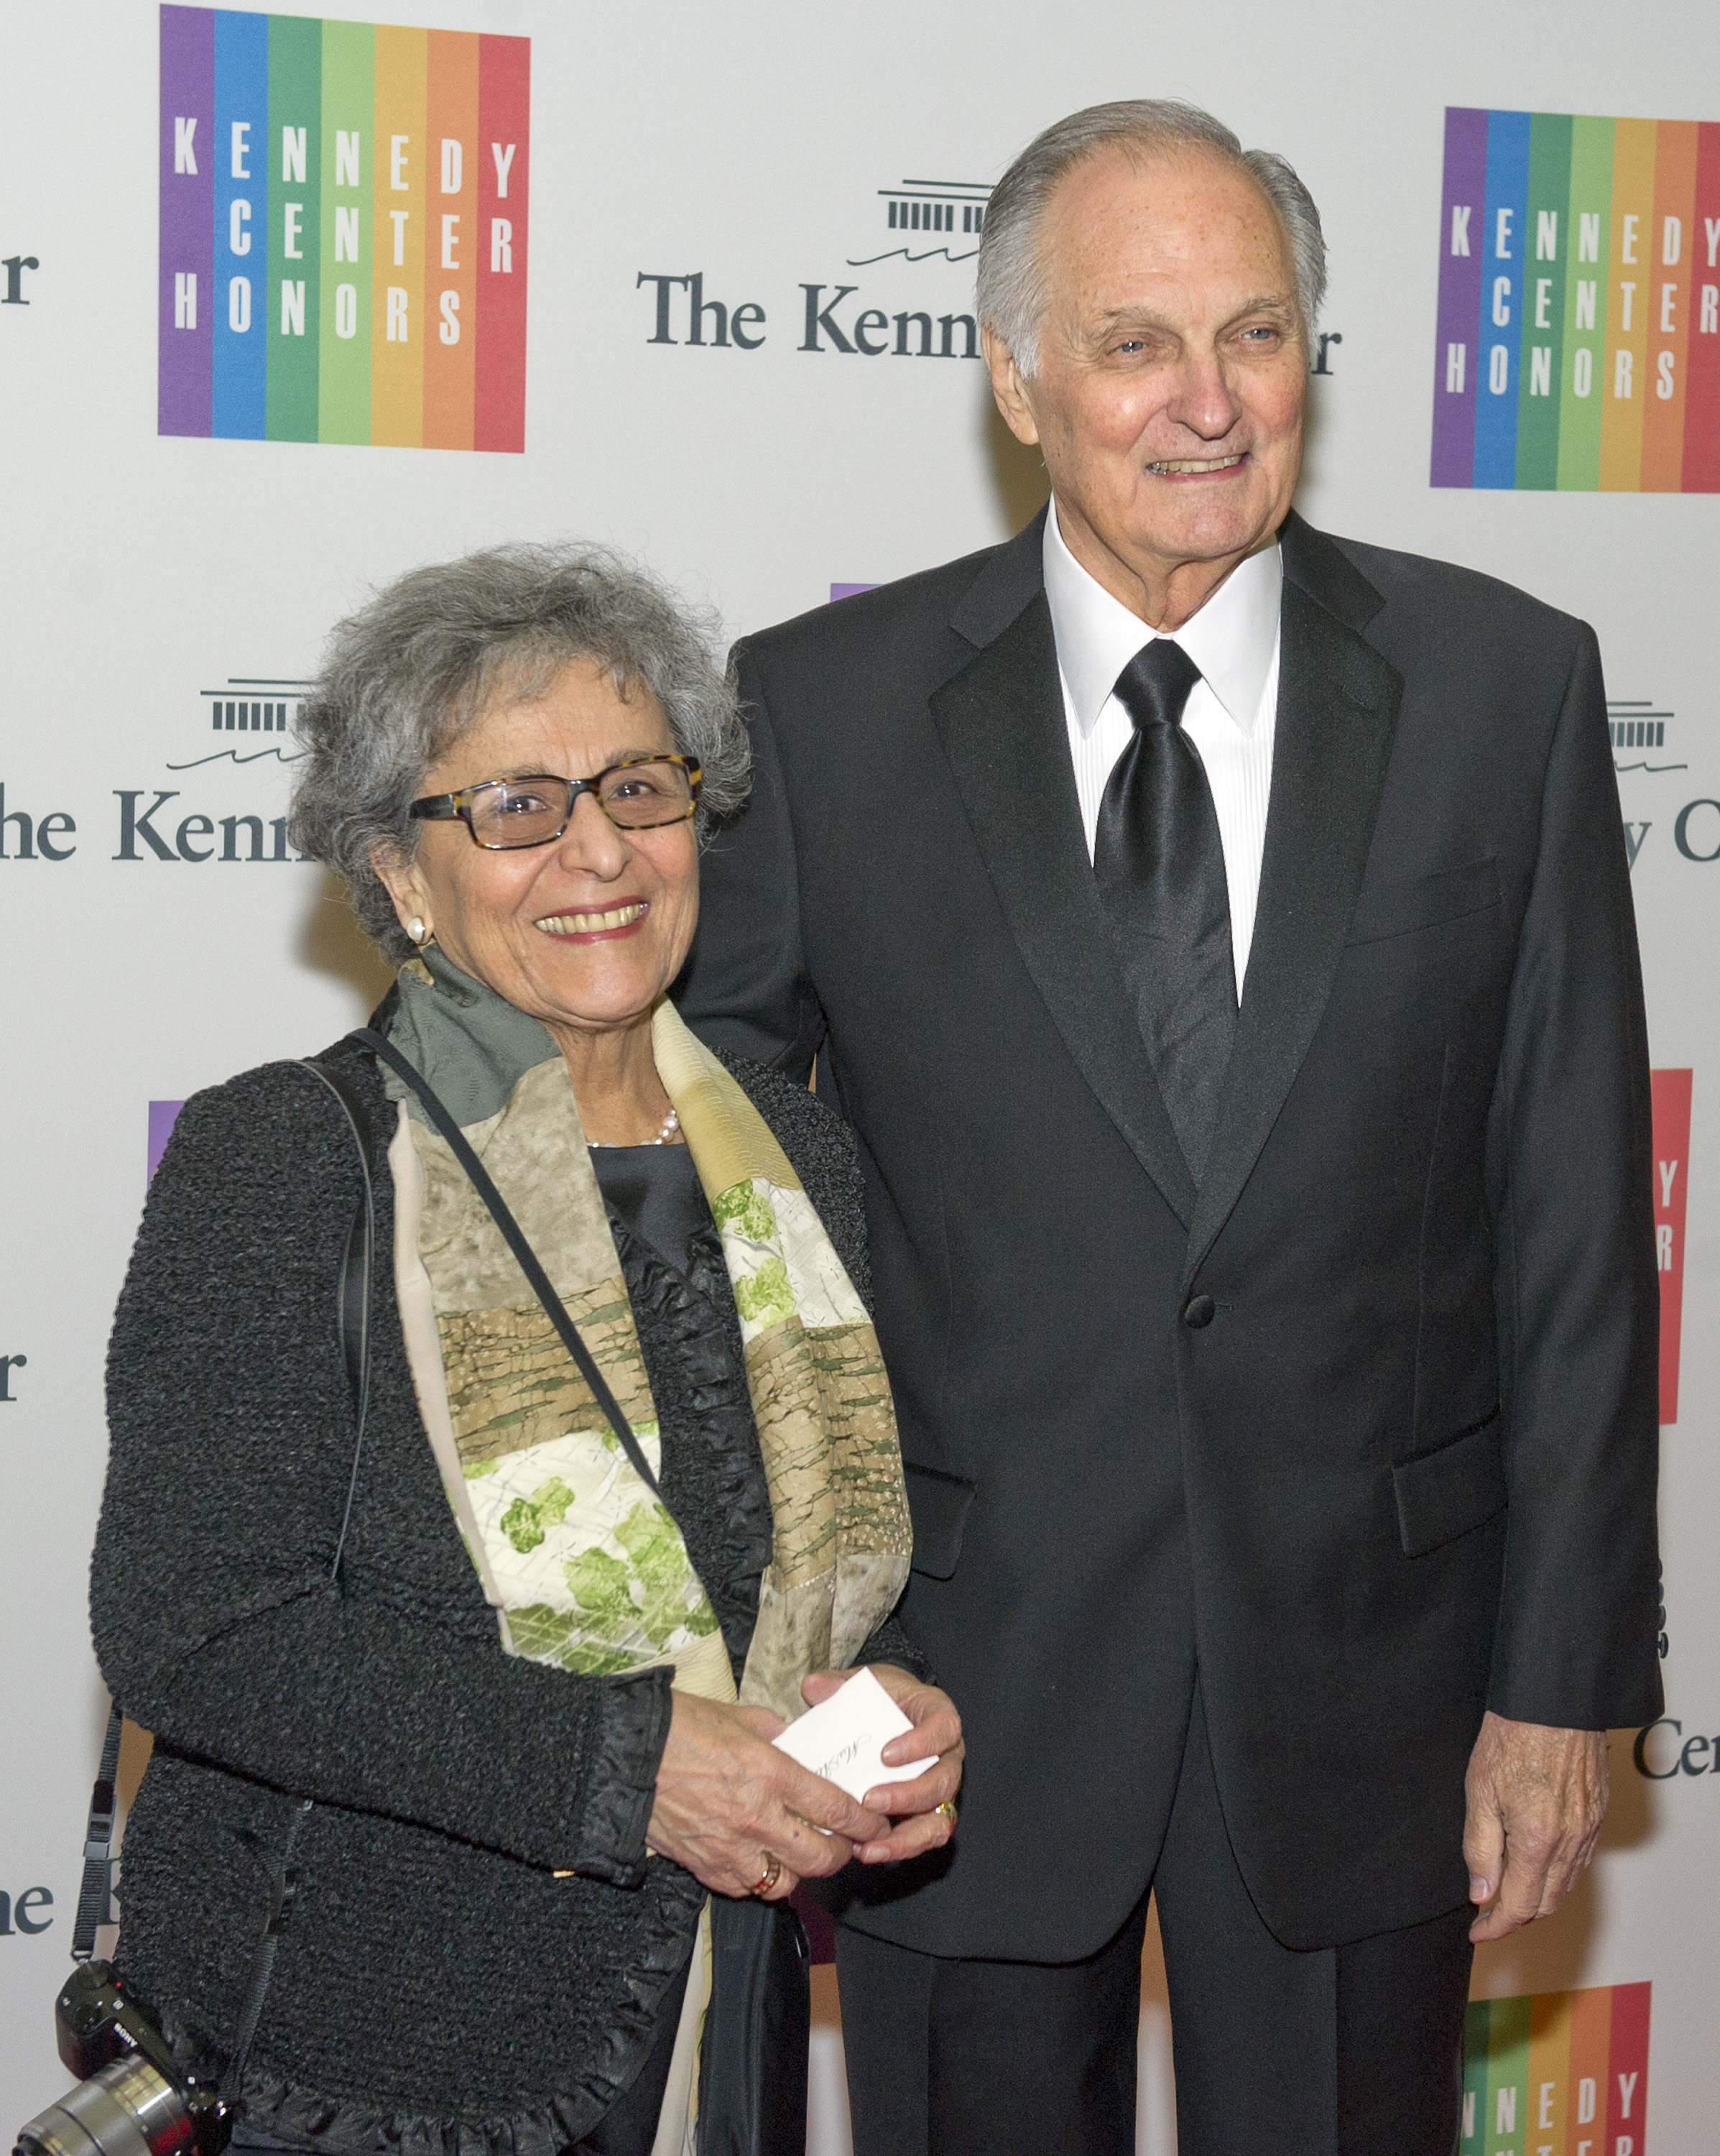 MASH actor Alan Alda's 65-year marriage began with a dropped cake - 9Honey